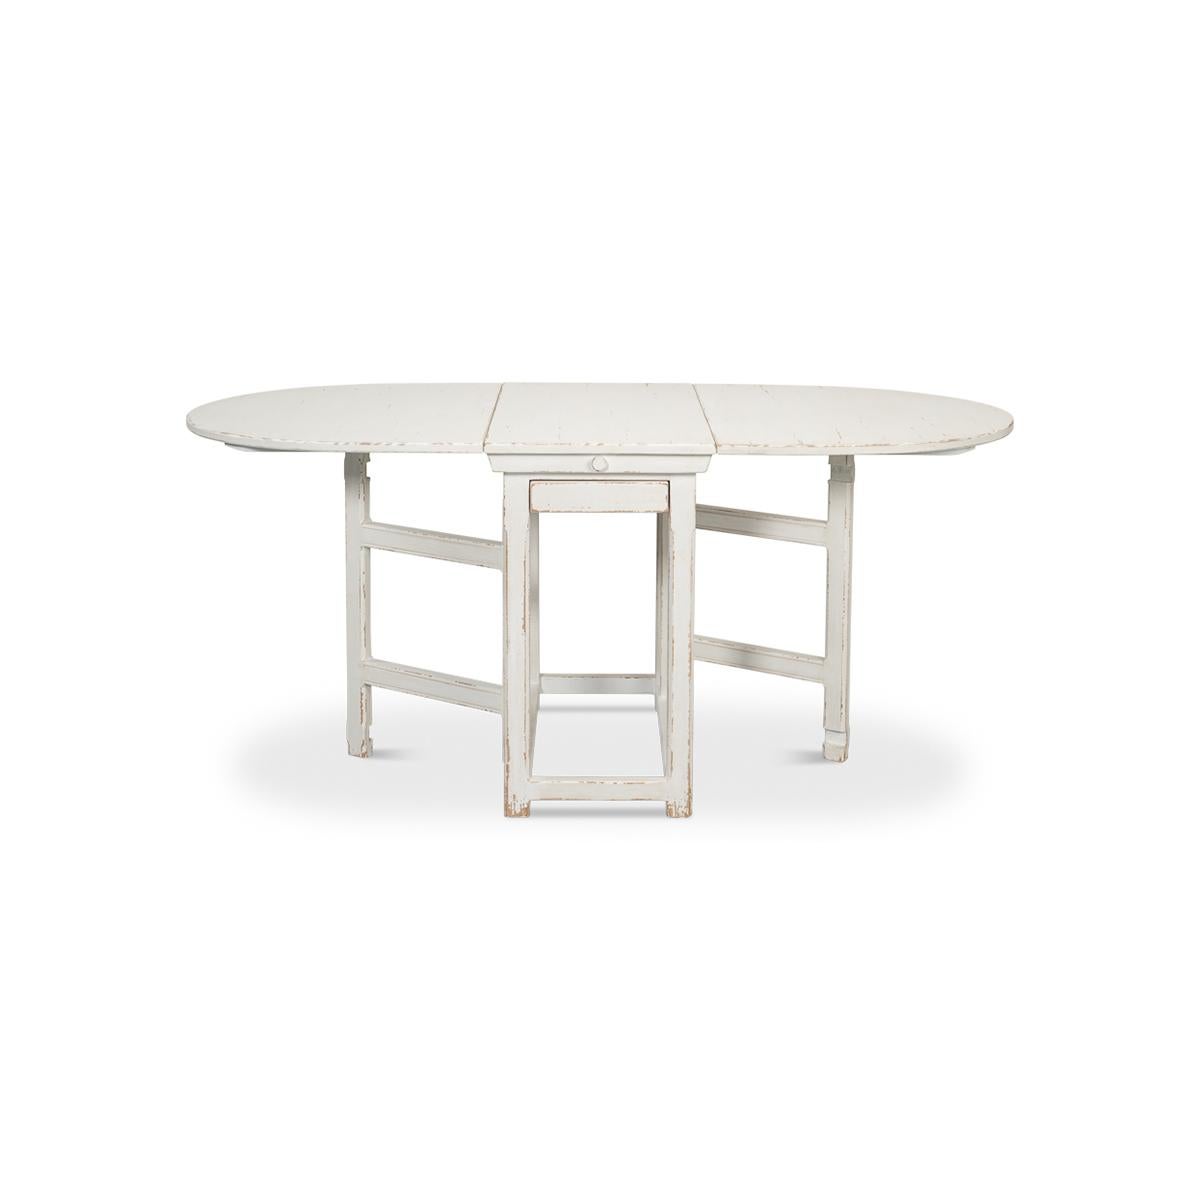 With an initial compact width of 18 inches, this rustic whitewash-painted table gracefully expands to an impressive 69 inches in length. 

The journey from a chic rectangle to an oval shape is both effortless and visually stunning, thanks to its